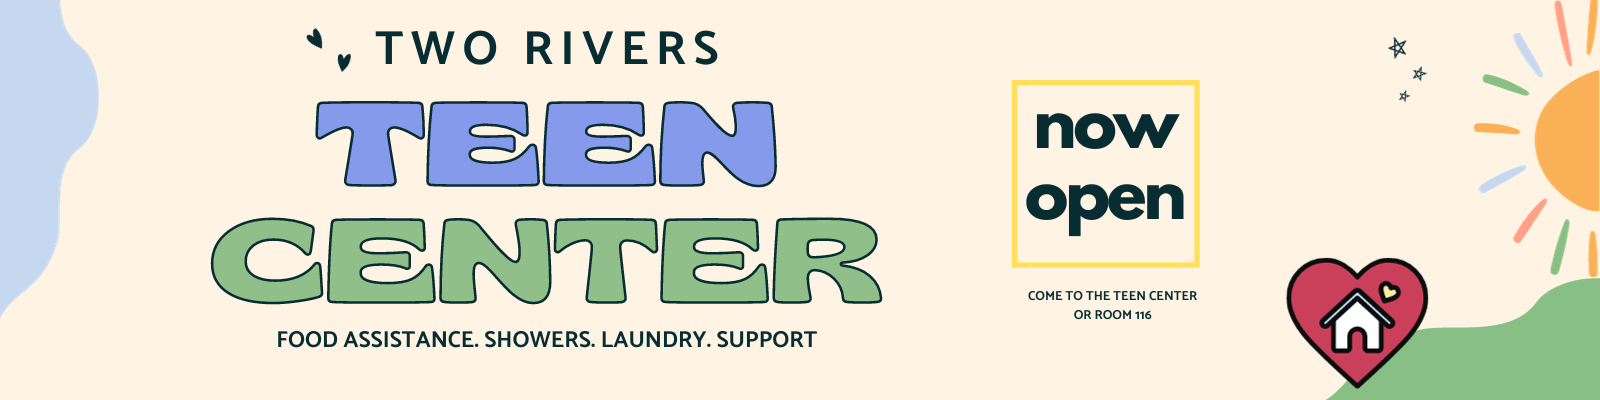 Two Rivers Teen Center now open. Food assistance, showers, laundry, support - Room 116